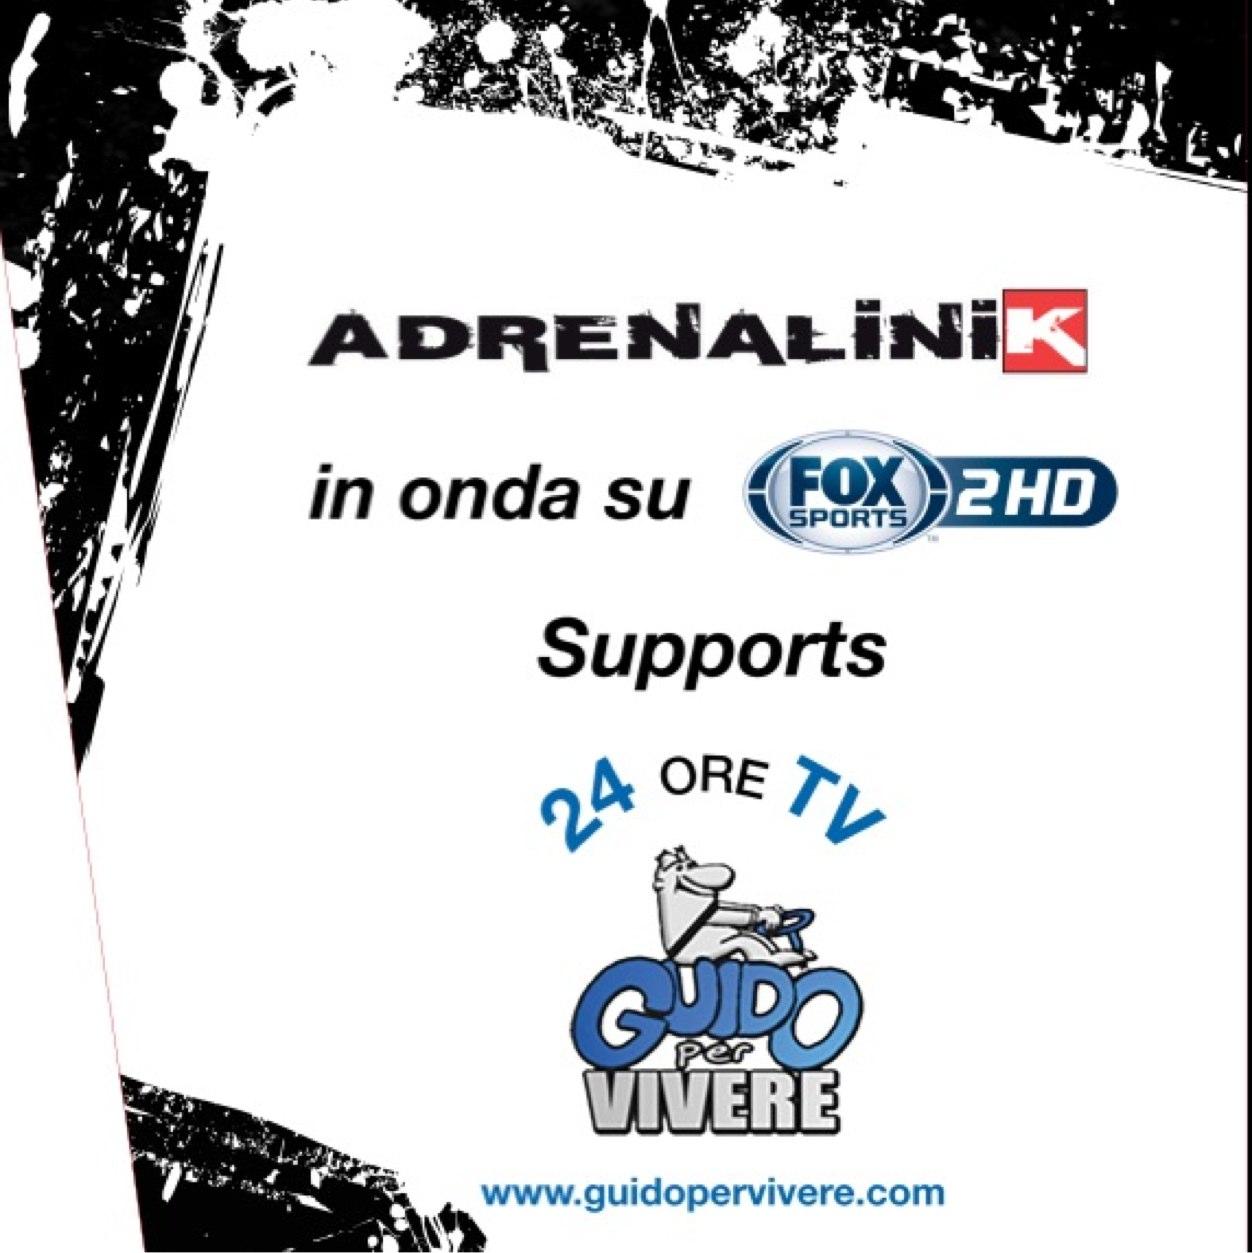 European Volunteers of iDrive4Life Foundation - Guidopervivere Onlus , for a Safe and Adrenalinik Life ! Save Lives Now. Support our Charity Projects.